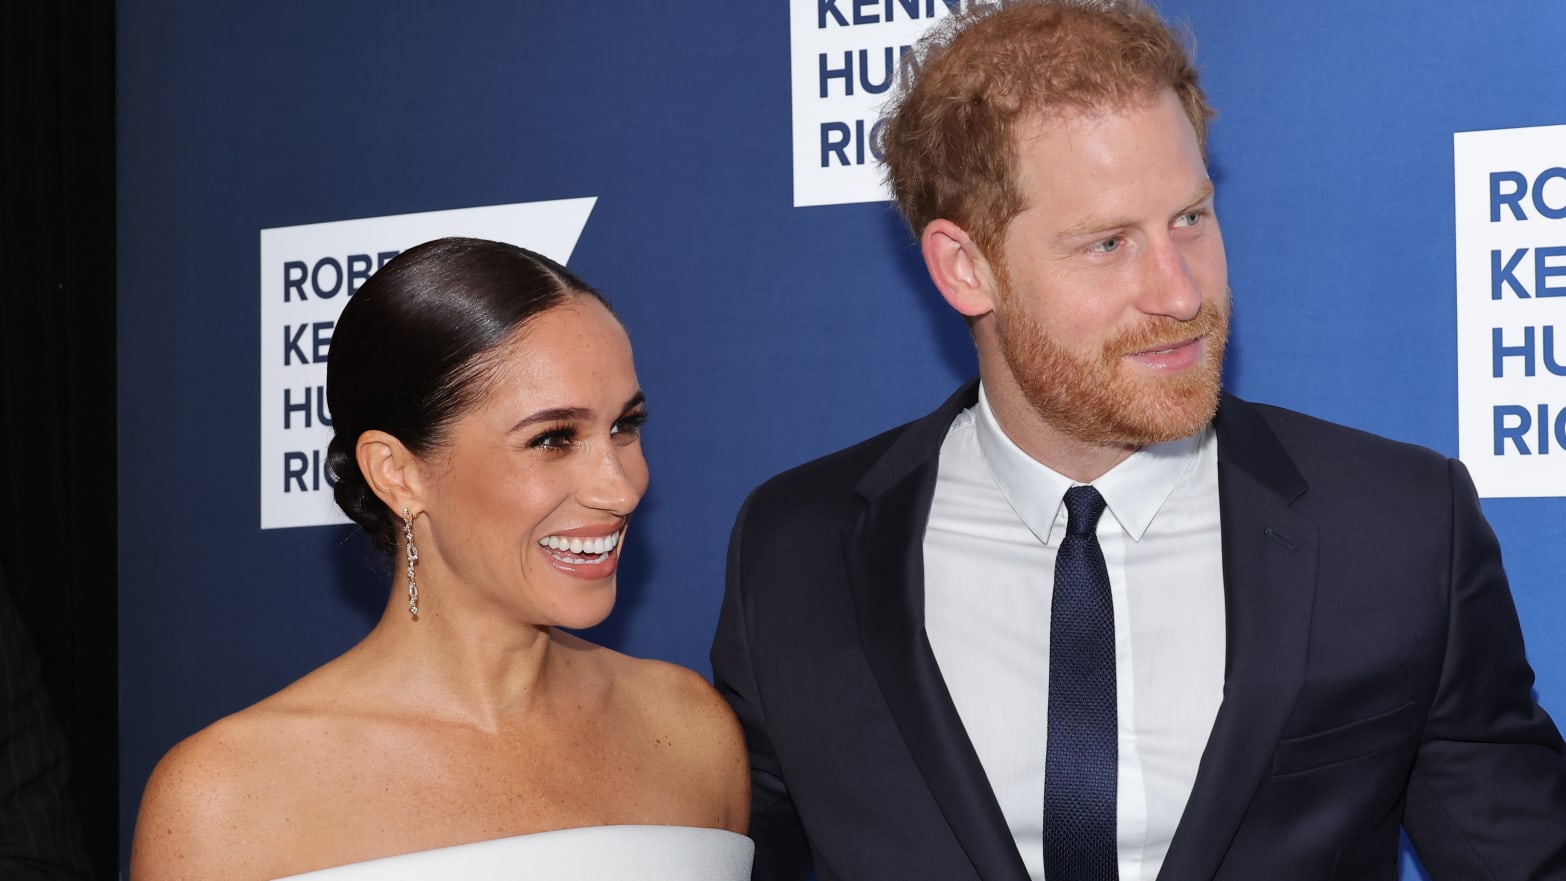 Bad Luck: Meghan, Duchess of Sussex and Prince Harry, Duke of Sussex